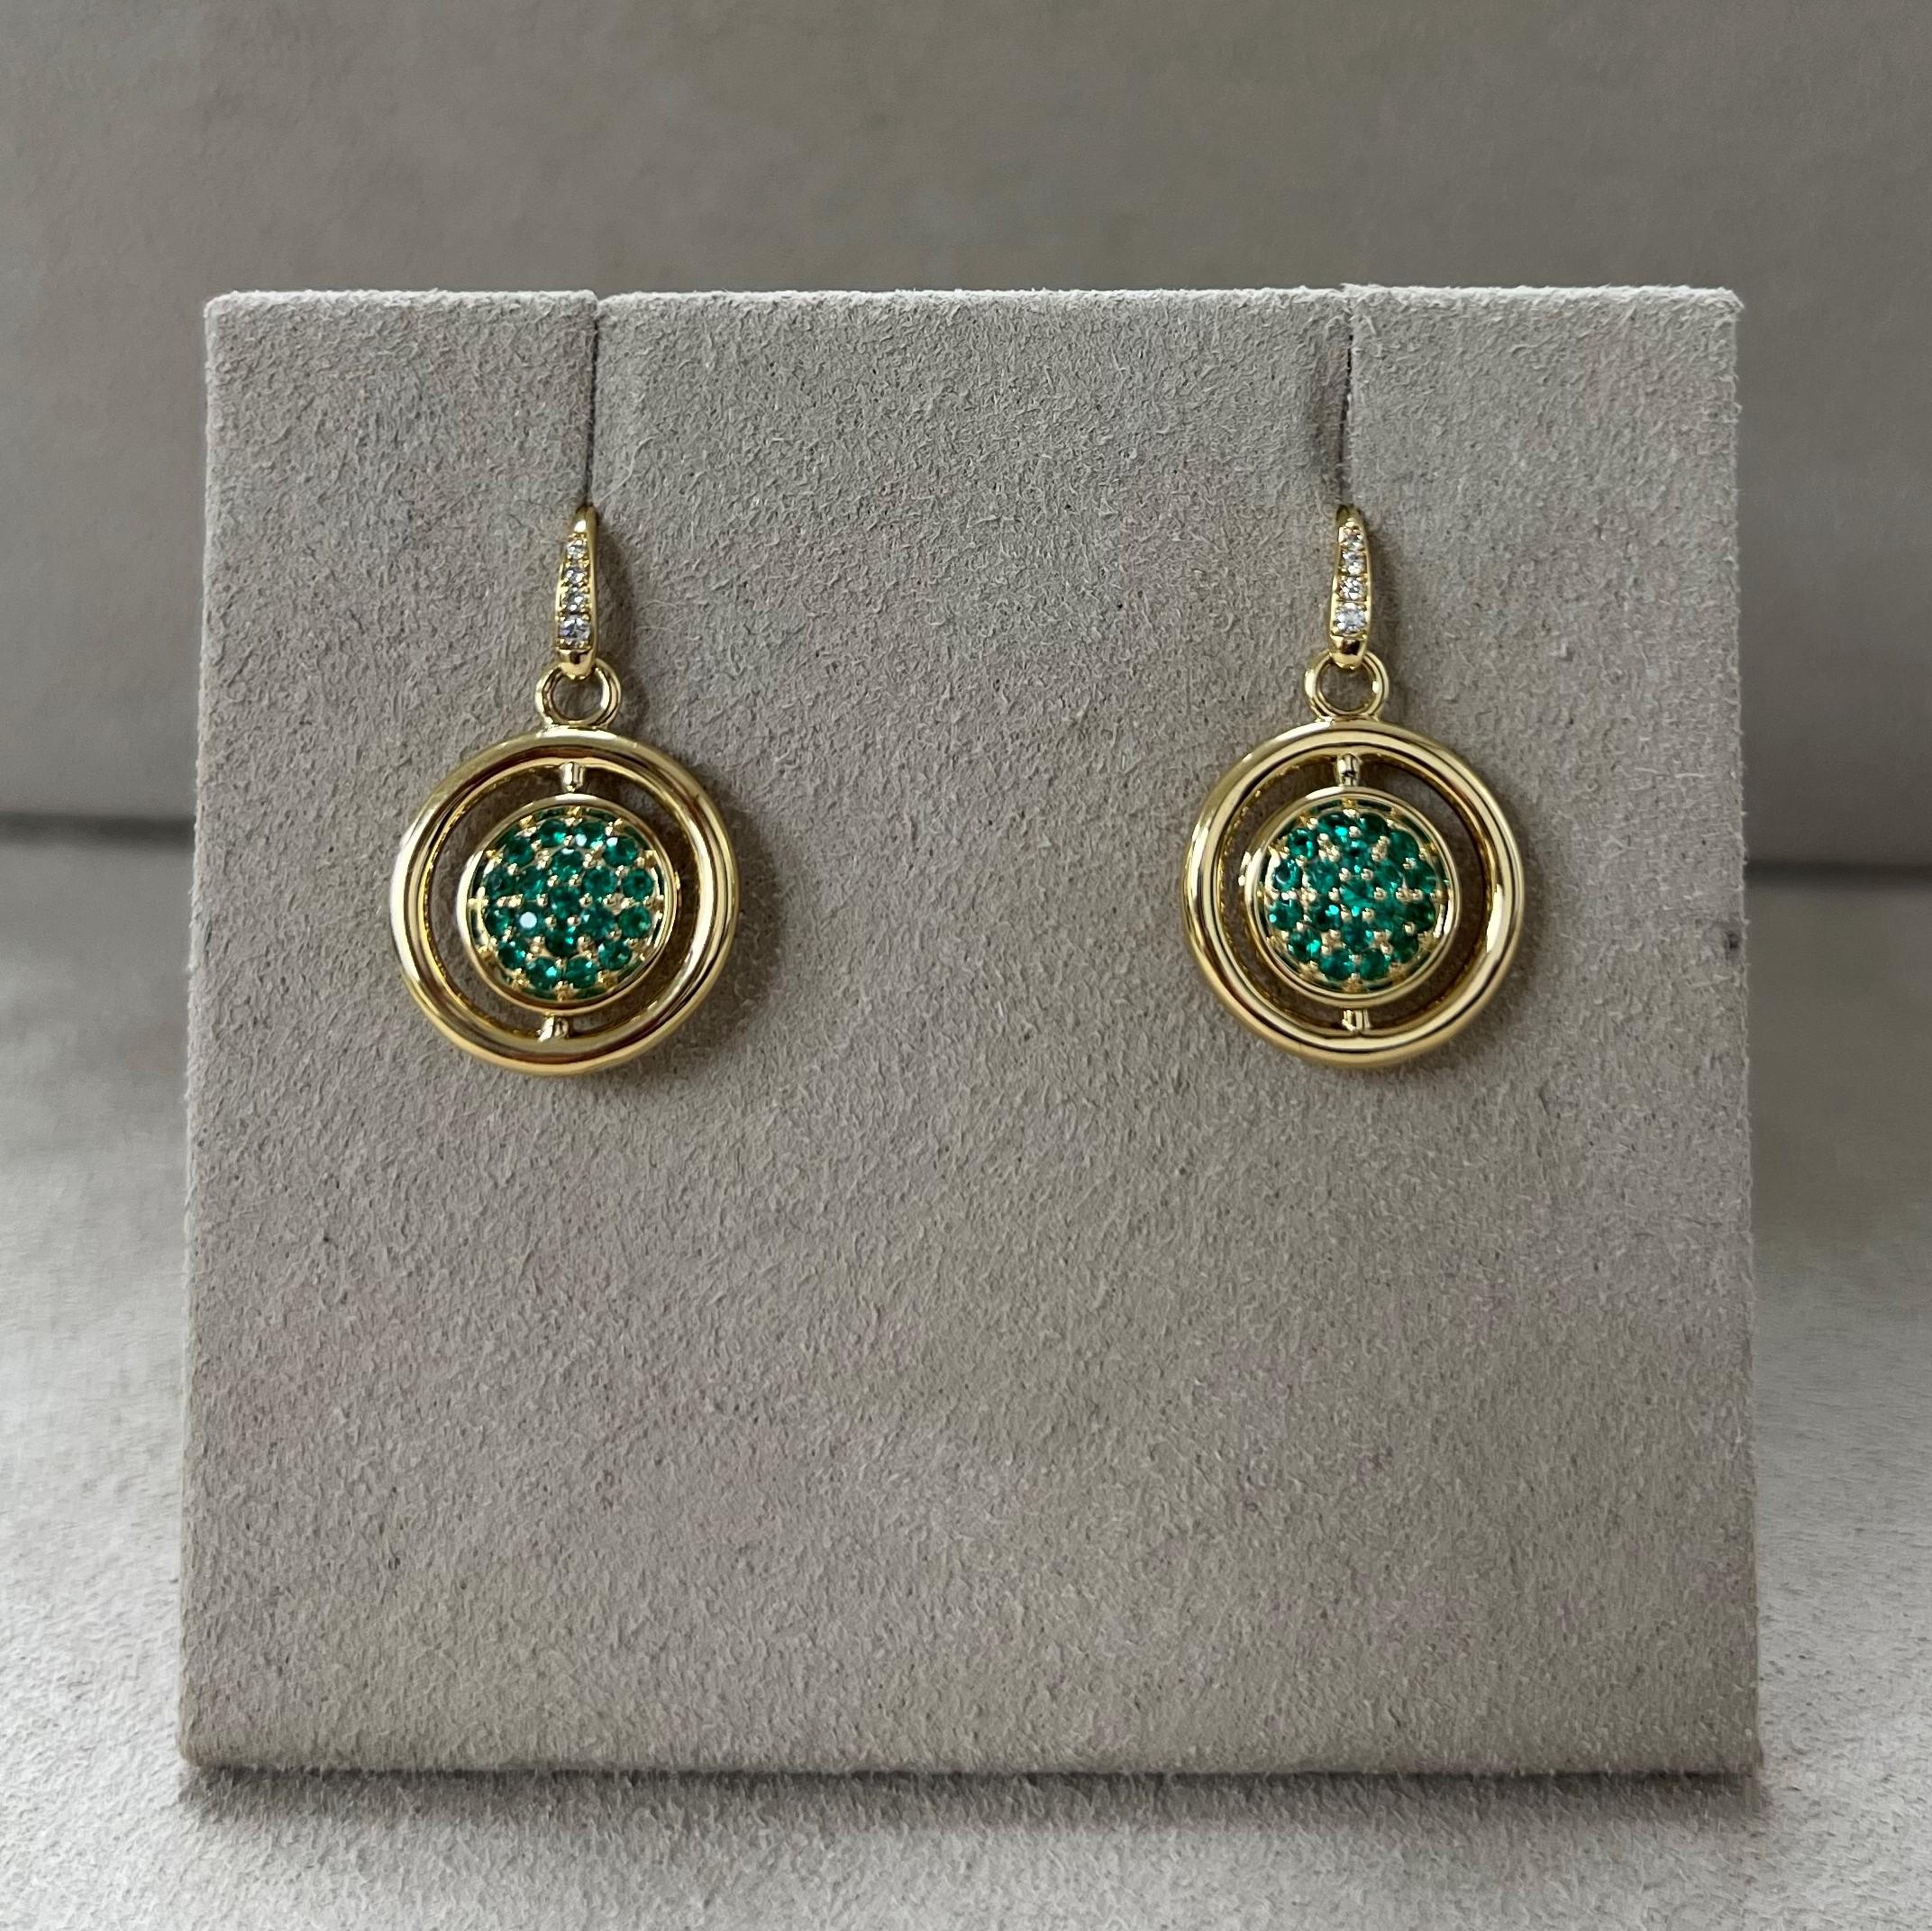 Created in 18 karat yellow gold
Diamonds 0.90 carat approx.
Emeralds 0.50 carat approx.
Reversible earrings
French wire for pierced ears



About the Designers

Drawing inspiration from little things, Dharmesh & Namrata Kothari have created an